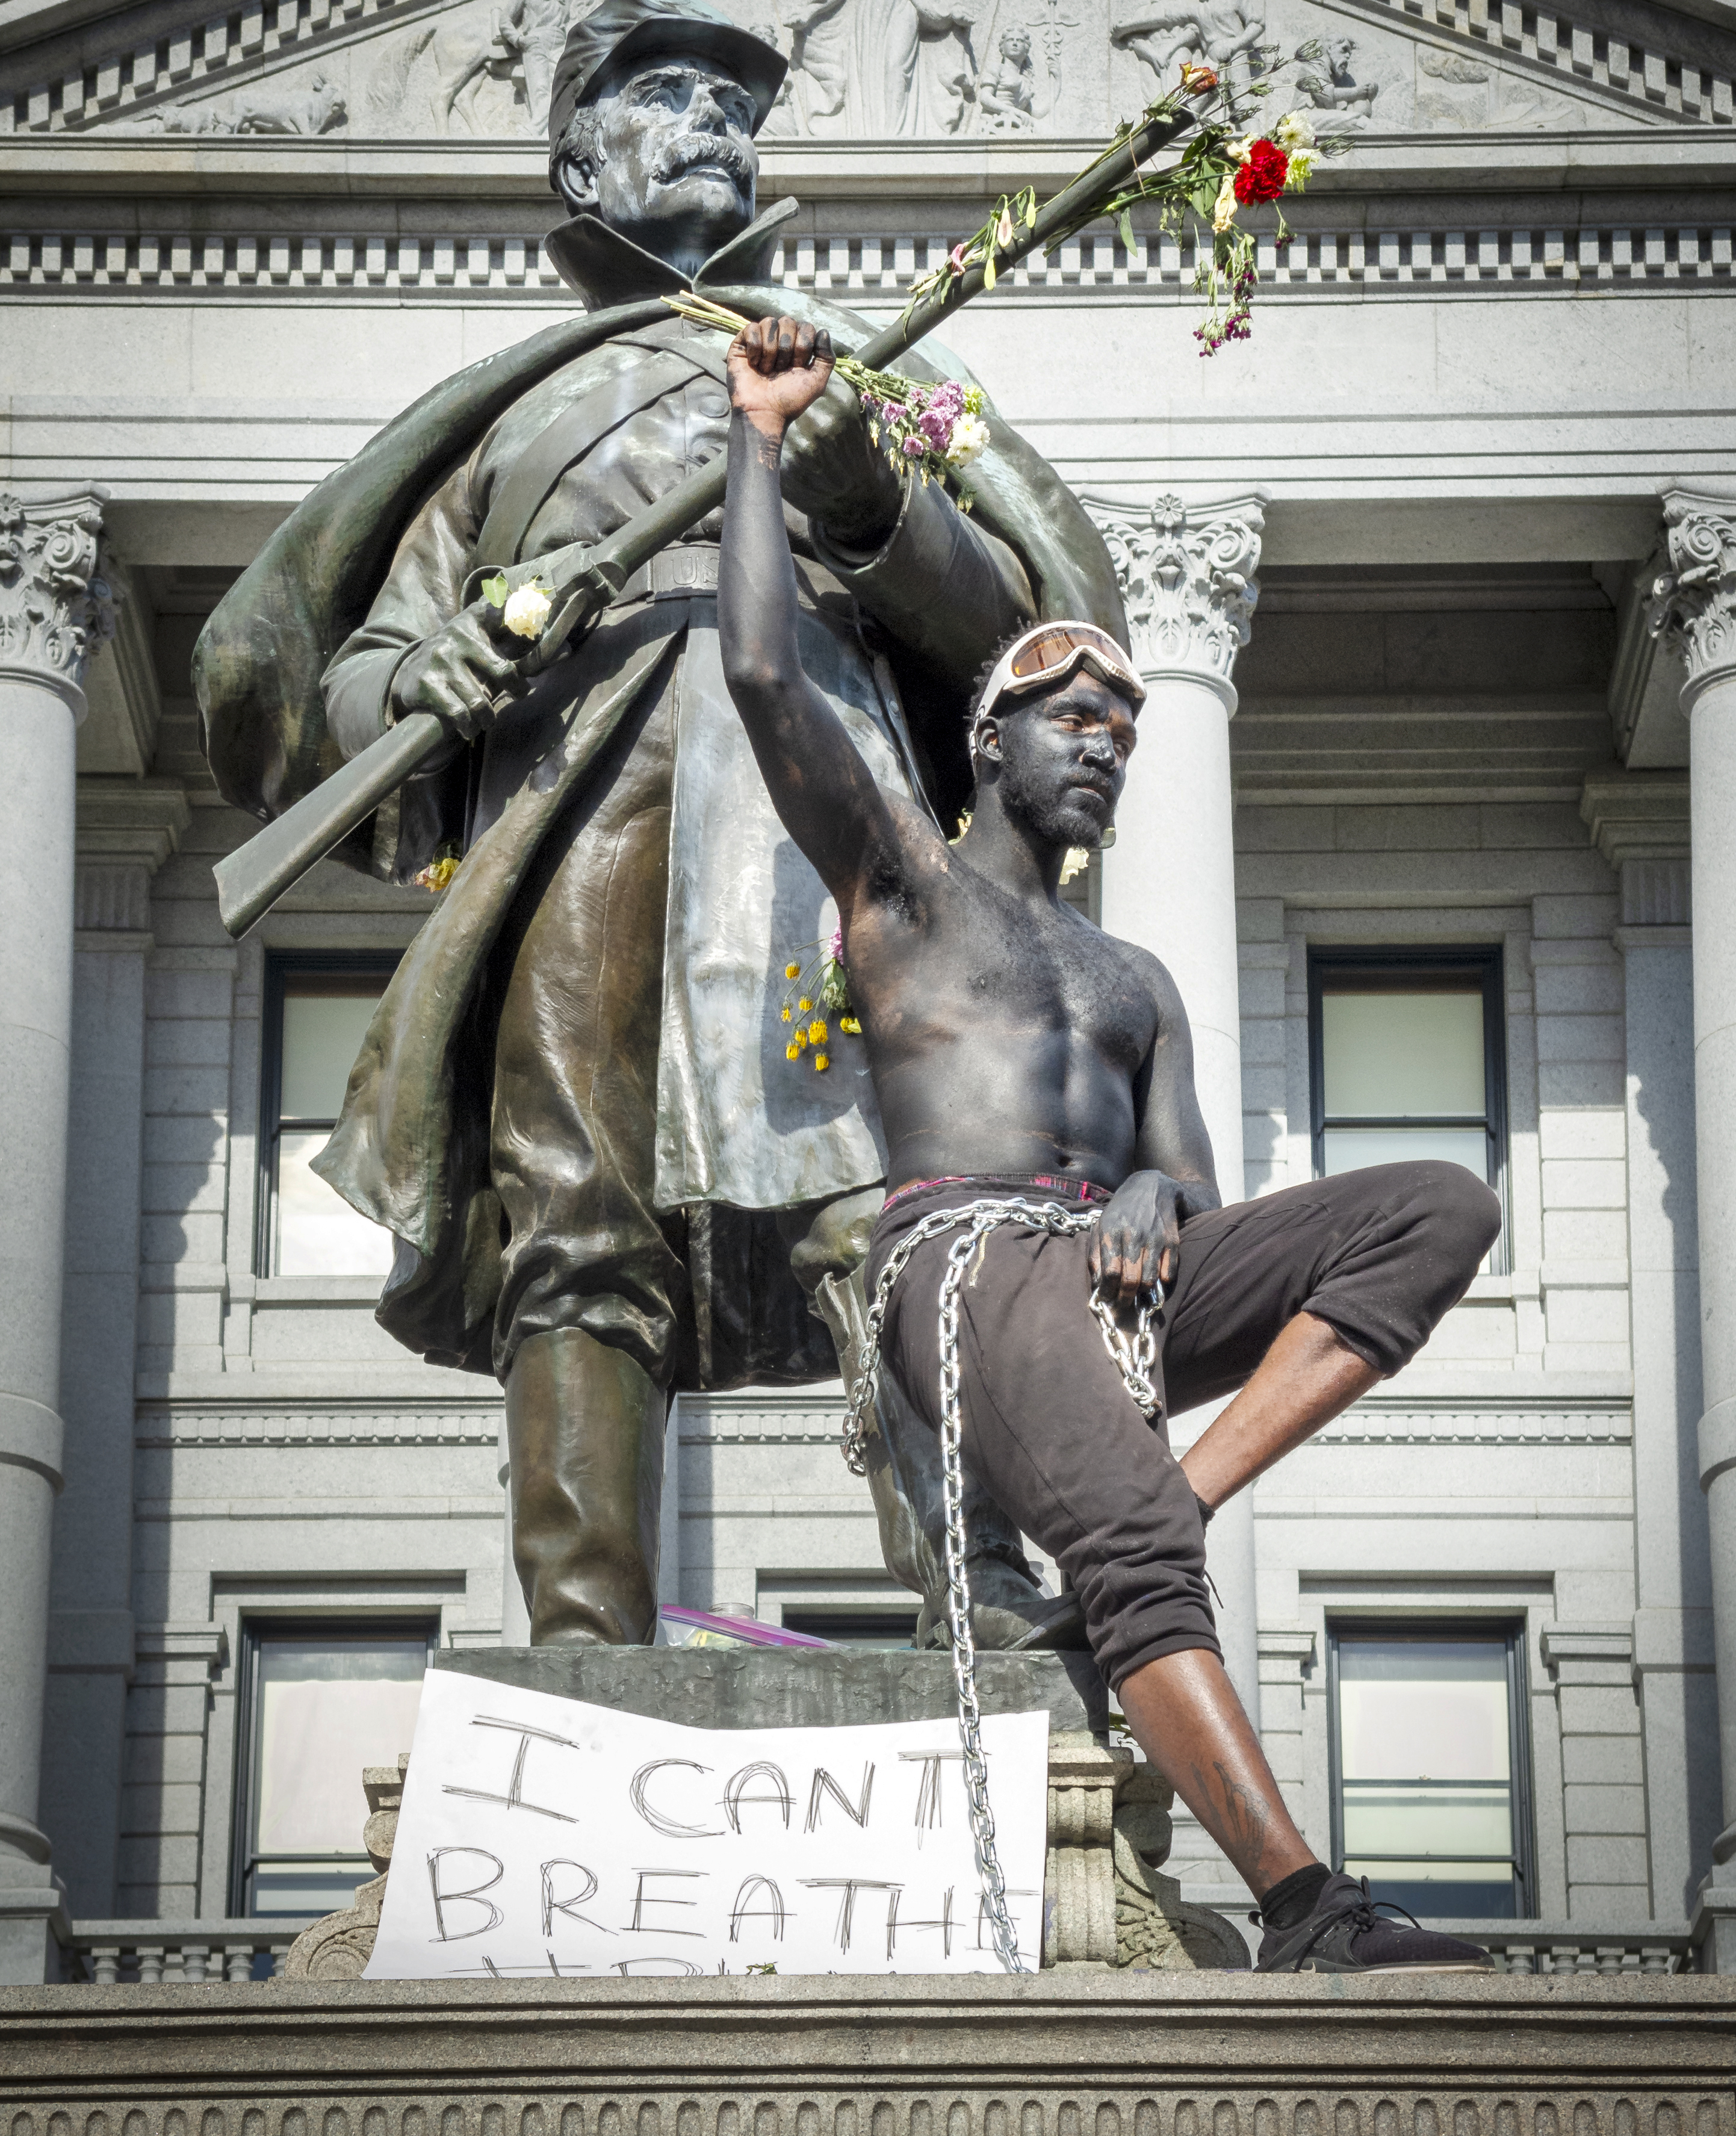 Photo of a Black Lives Matter protestor with a sign that says, "I can't breathe." He is seated at the base of a statue of a Civil War soldier. the protestor has painted himself to look bronzed like the statue, and he wears pants, chains around his waist, shoes, and white ski goggles that sit atop the protestor's head. His right fist is held high in the air. The statue of the soldier is holding a rifle, and flowers have been stuck into the end of the firearm.